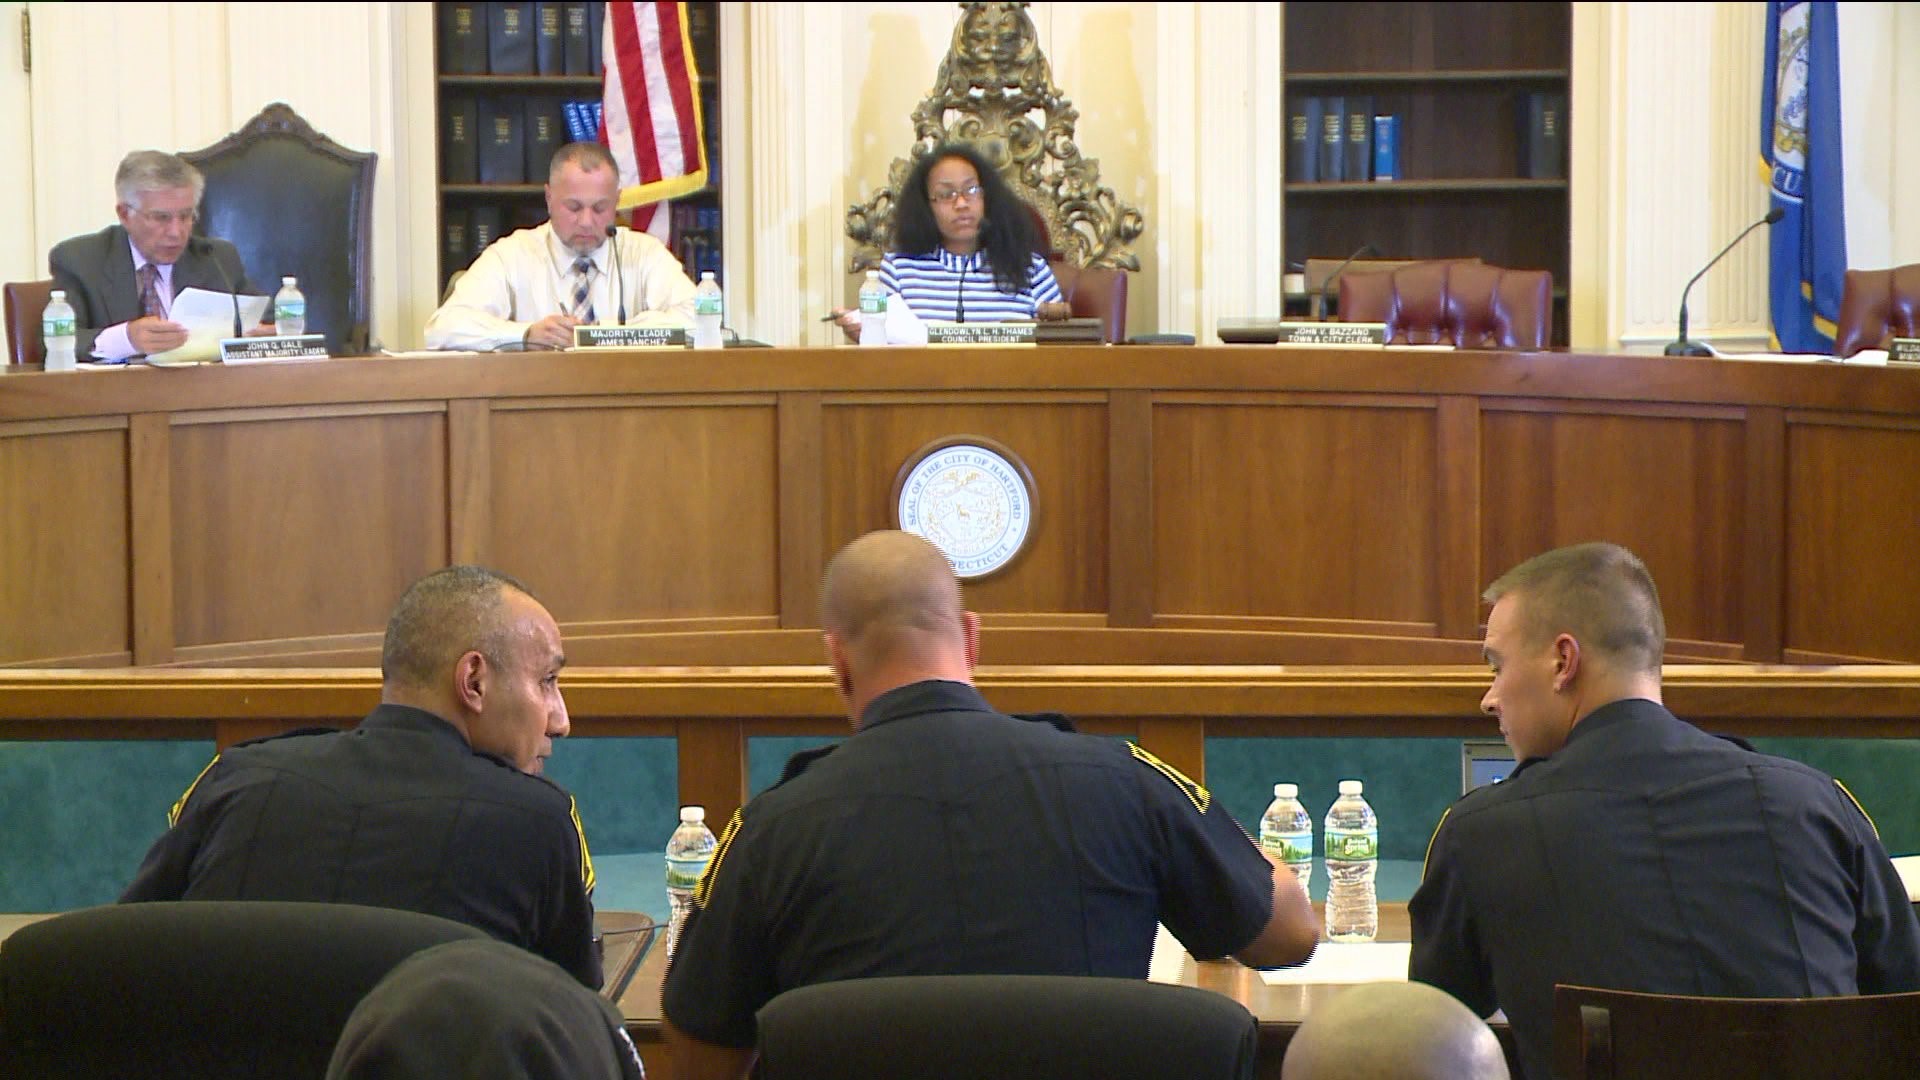 Hartford police officers address department concerns in public committee meeting